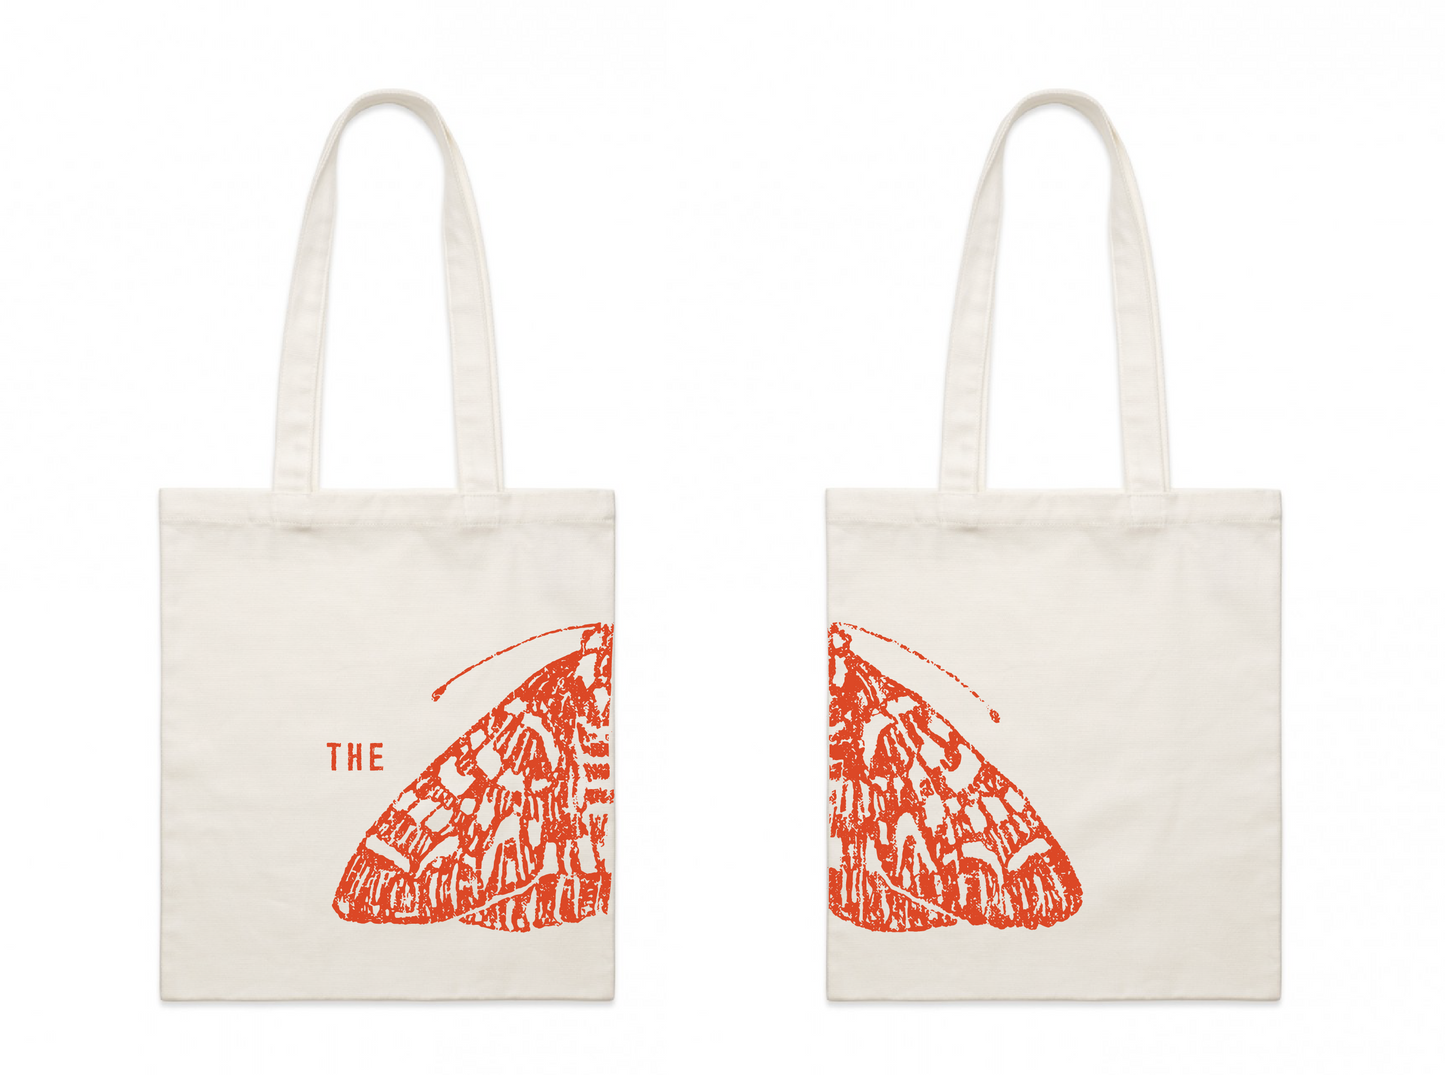 The Moth Tote